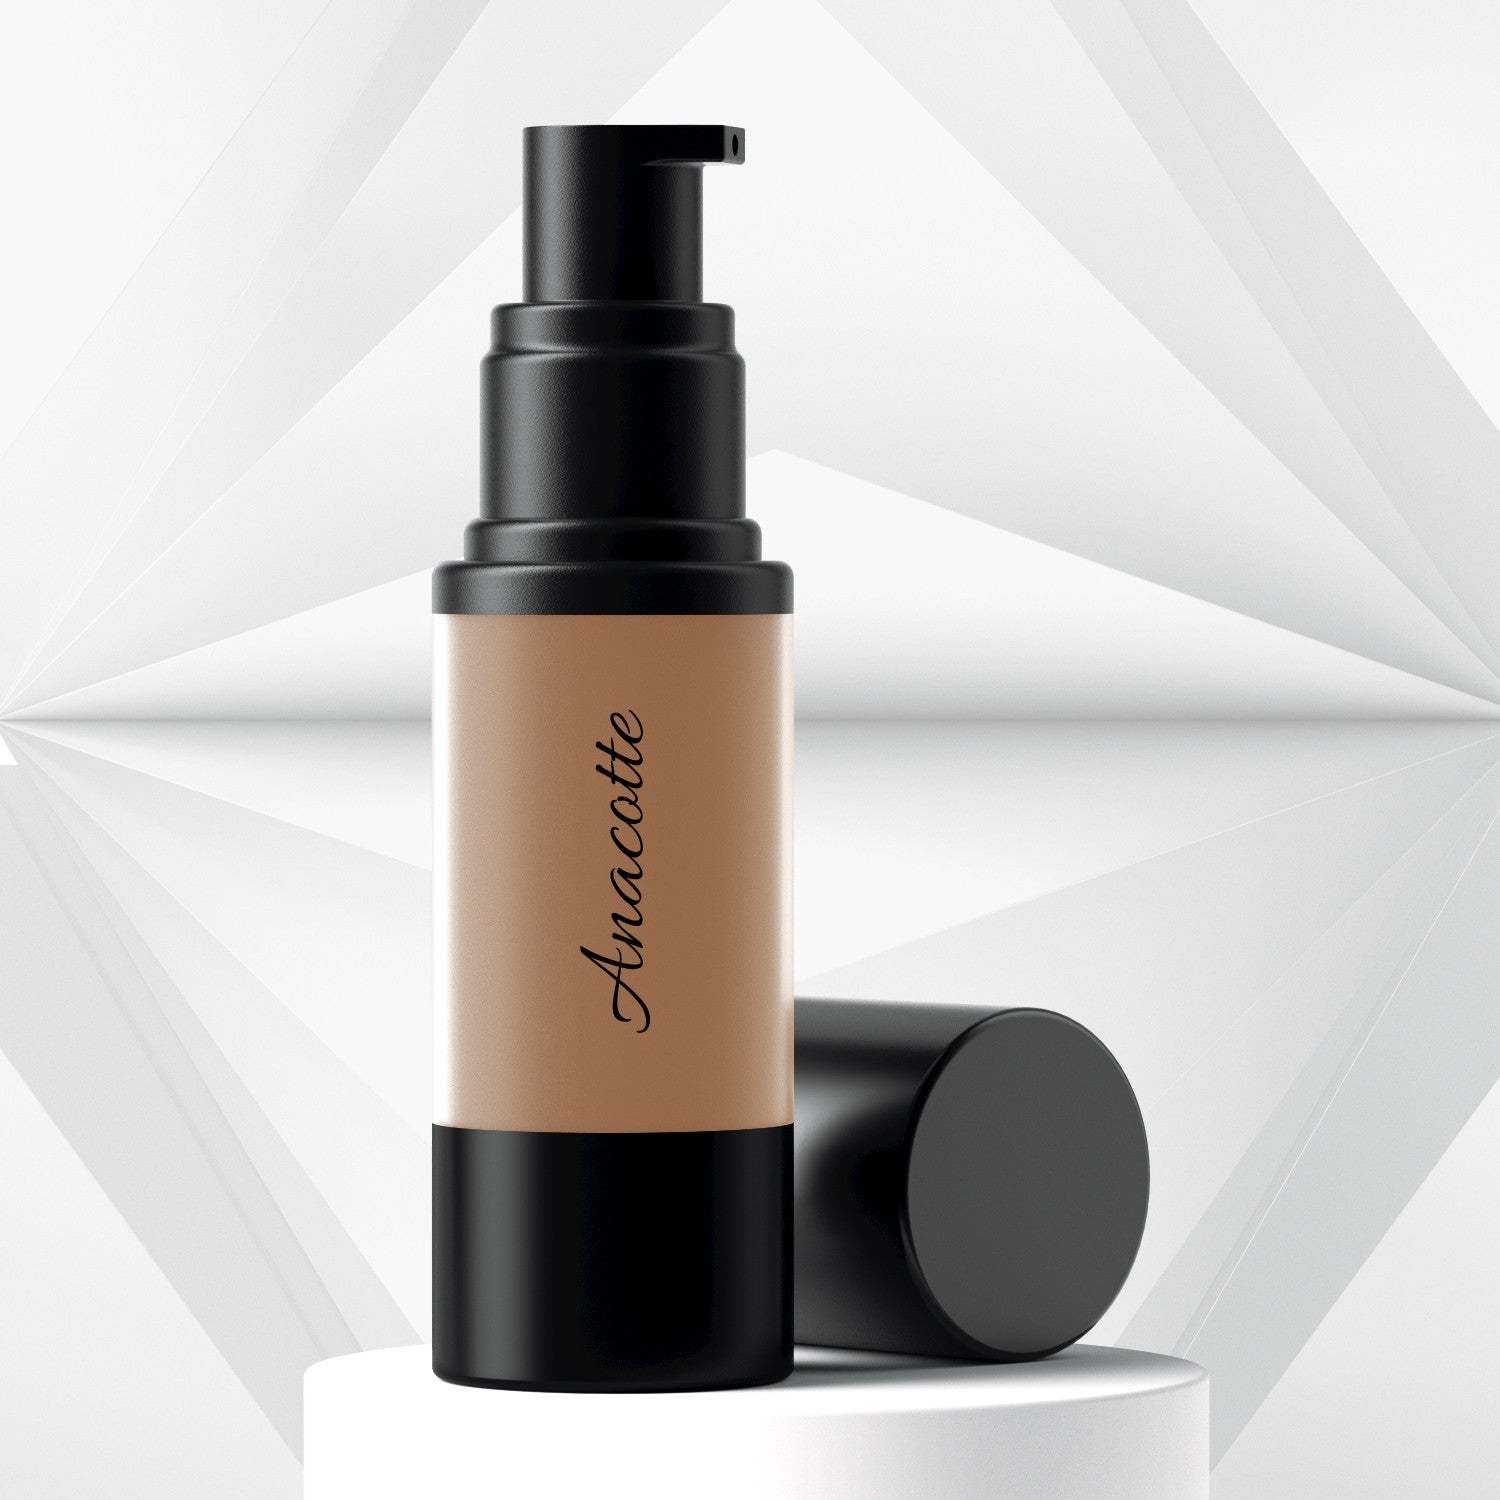 Anacotte Anti-aging Oil-Free Foundation Makeup light brown